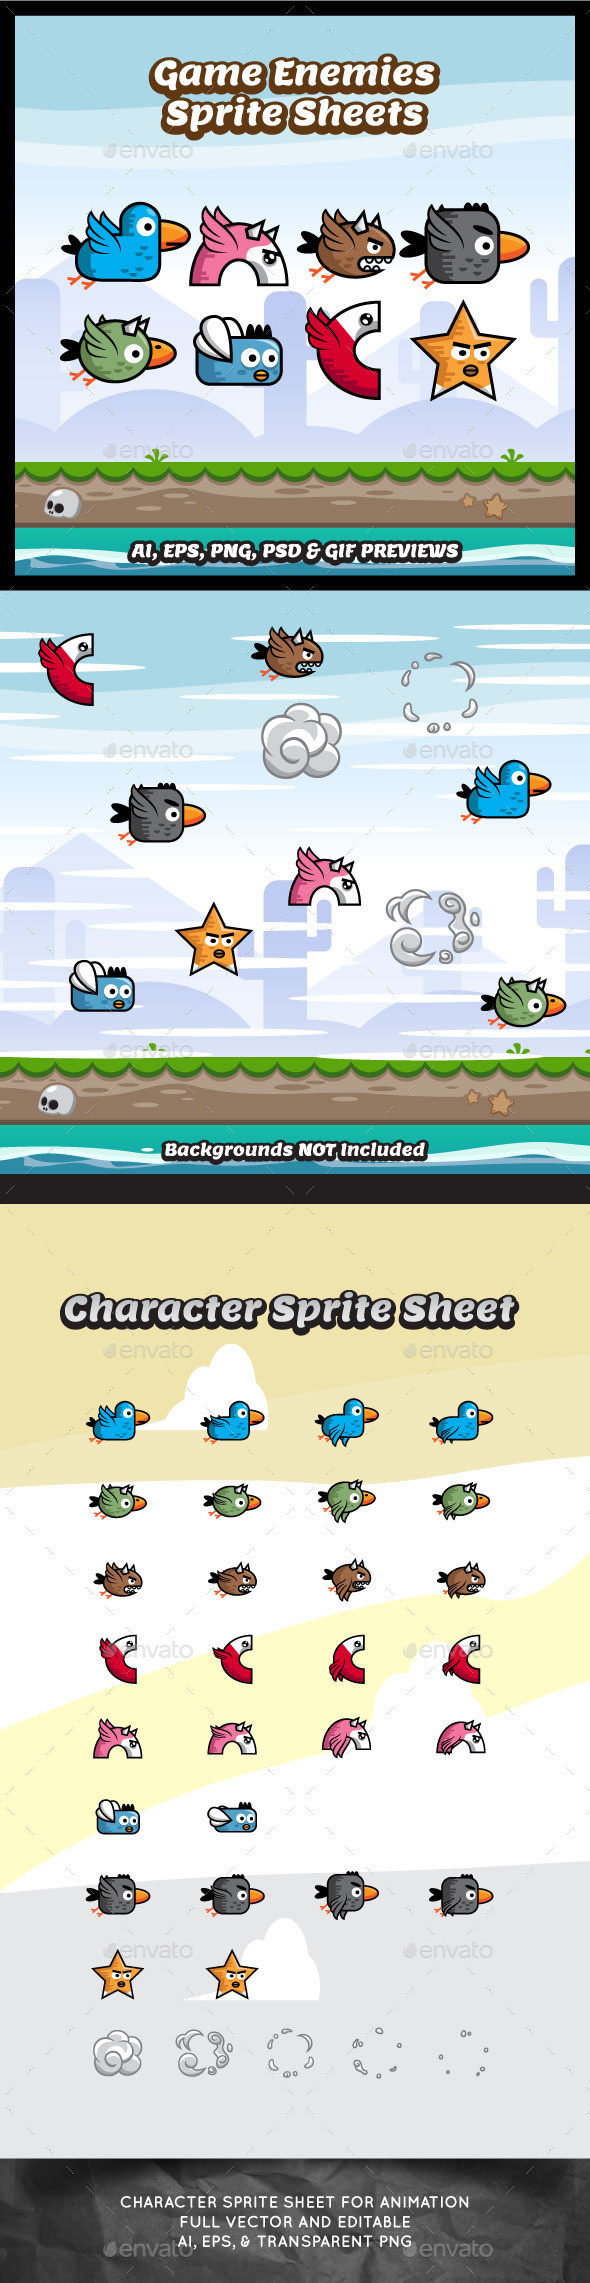 Eight flappy game enemies sprite sheets sidescroller game asset flying flappy animation gui mobile games gameart game art 590